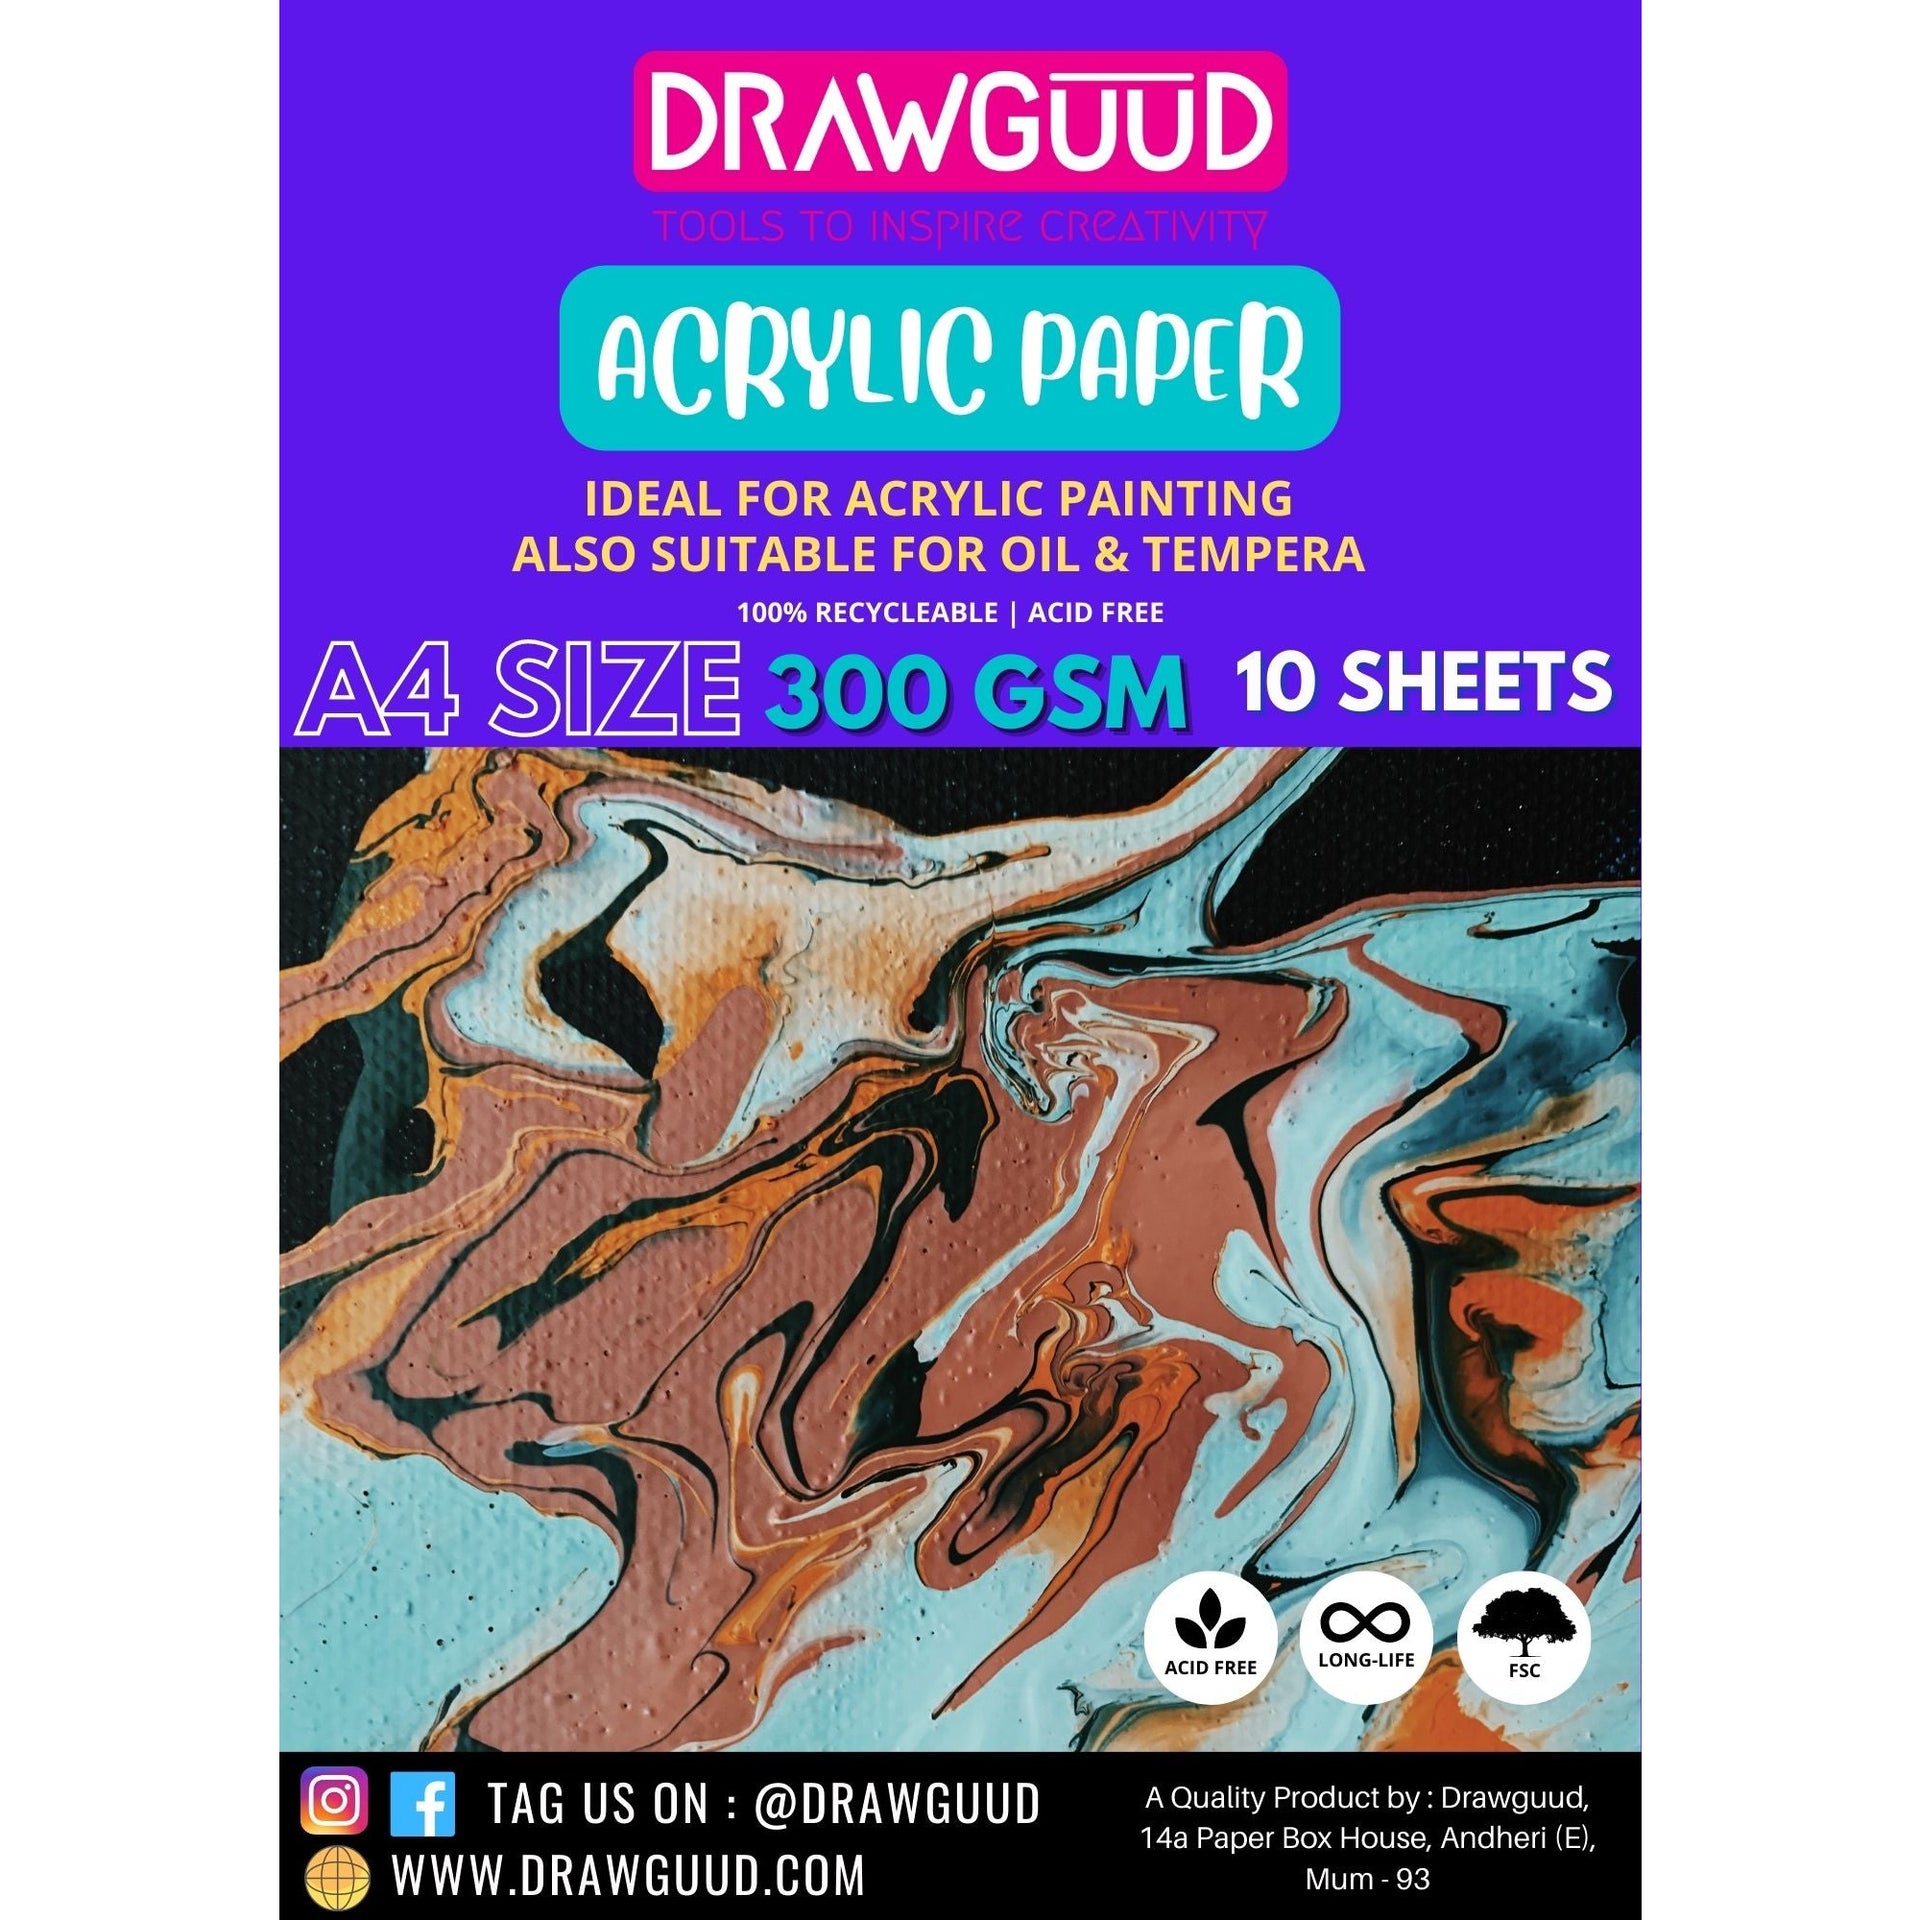 DRAWGUUD CANVAS TEXTURED PAPER 300 GSM SHEETS WIRO BOOK,WHITE